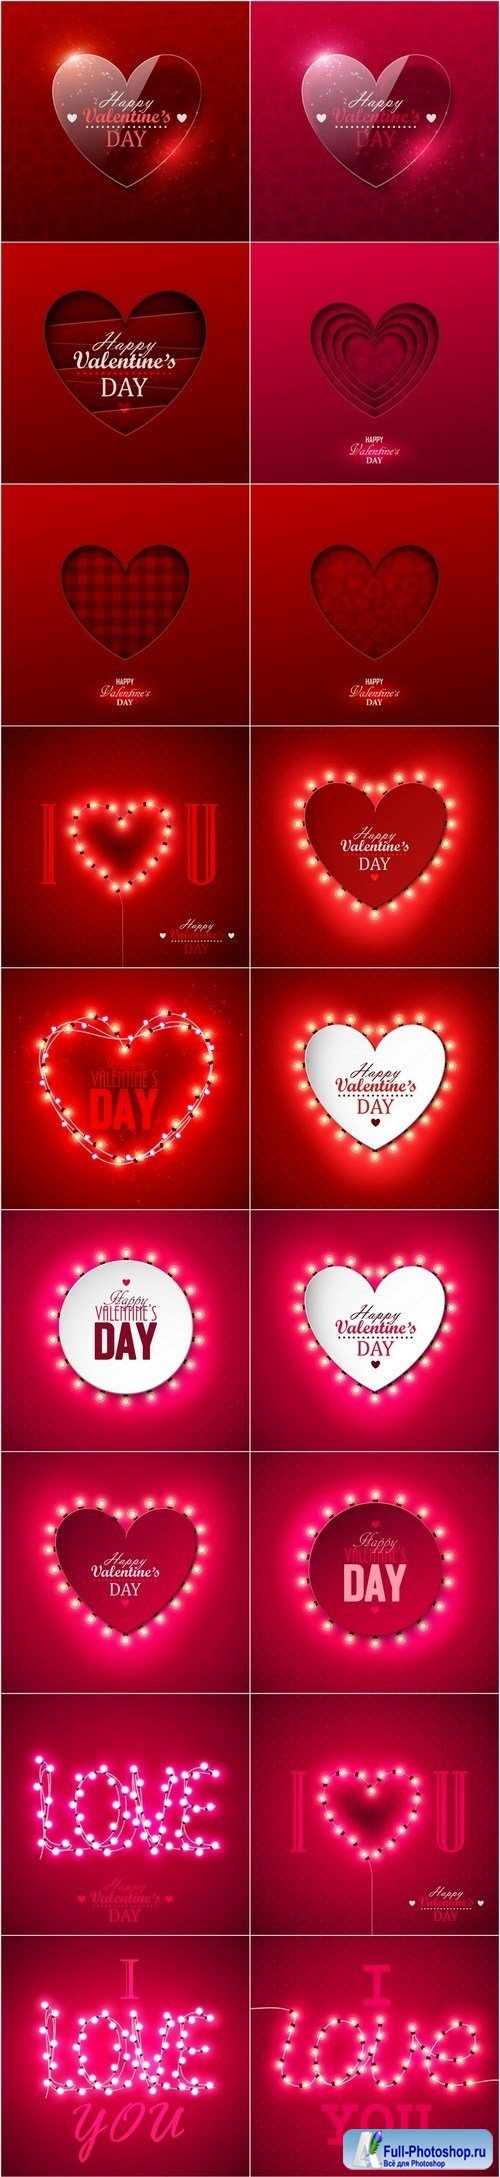 Heart & Love - Happy Valentines Day 7 - Set of 21xEPS Professional Vector Stock